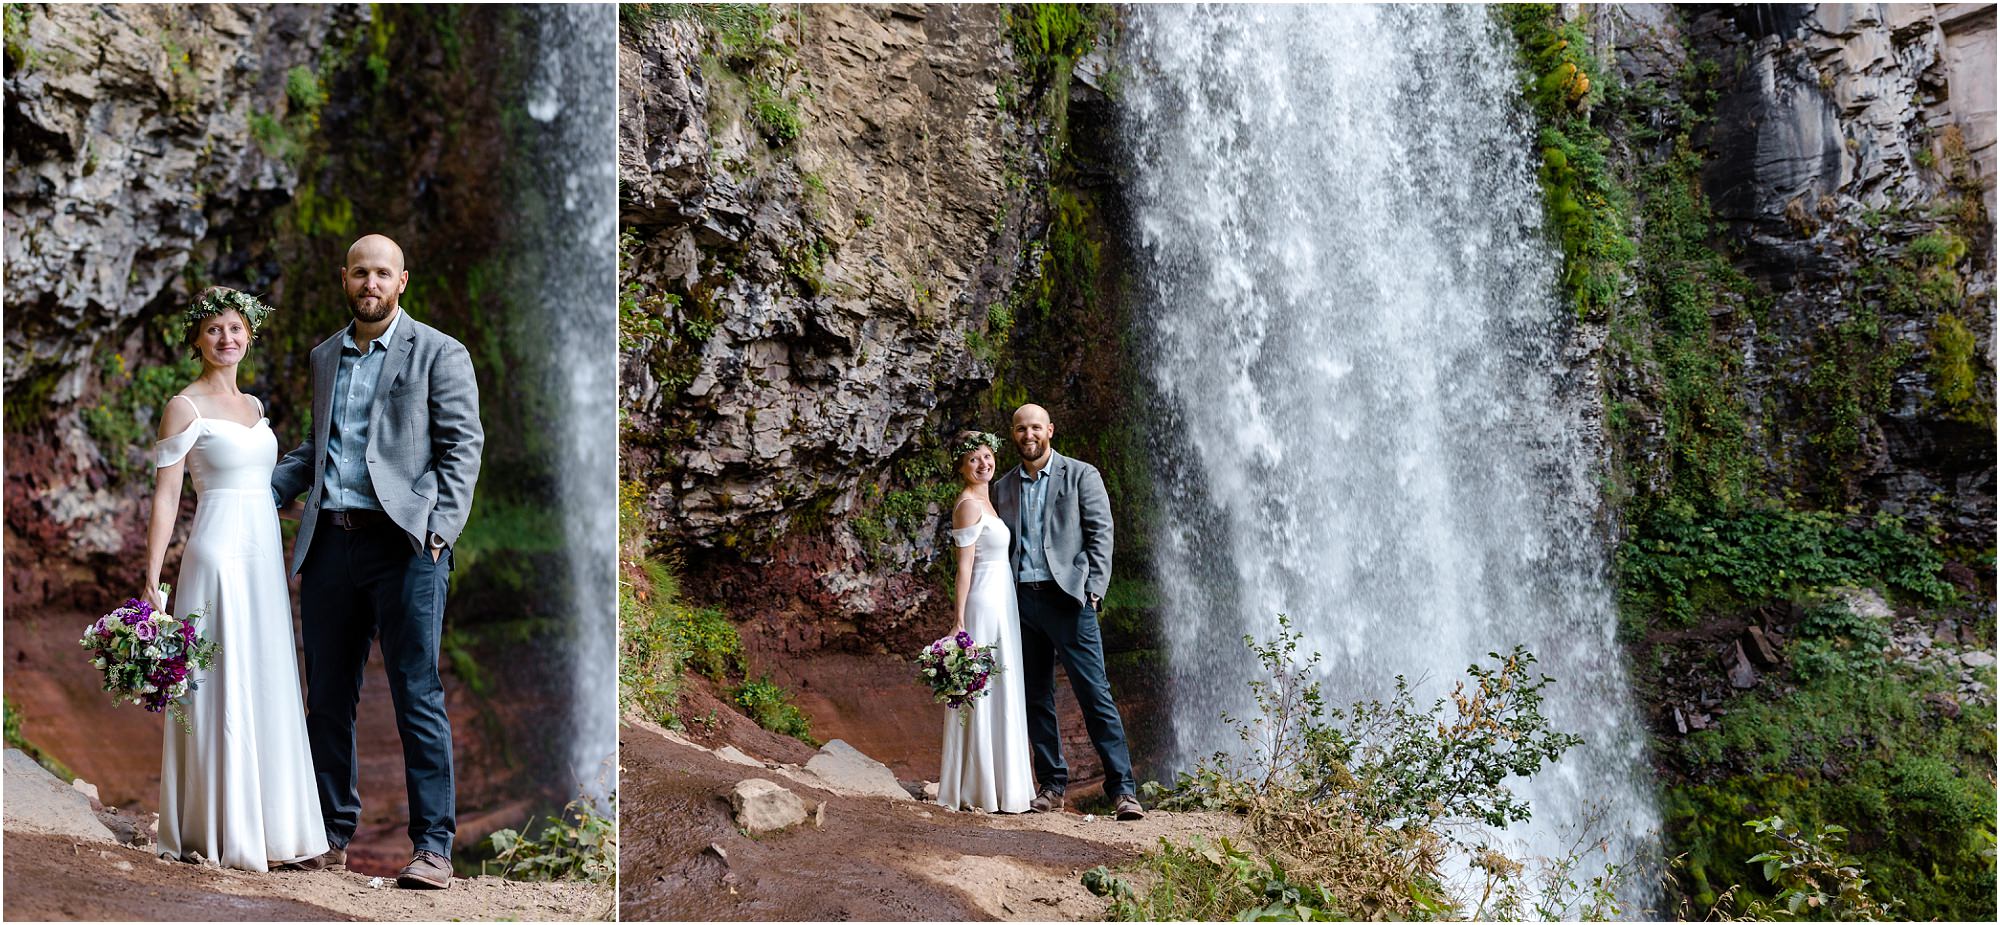 A bride in a Reformation flutter sleeve white dress and groom in a navy and dusty blue sport coat pose under the raging waterfall at their Tumalo Falls elopement in Bend, OR. | Erica Swantek Photography